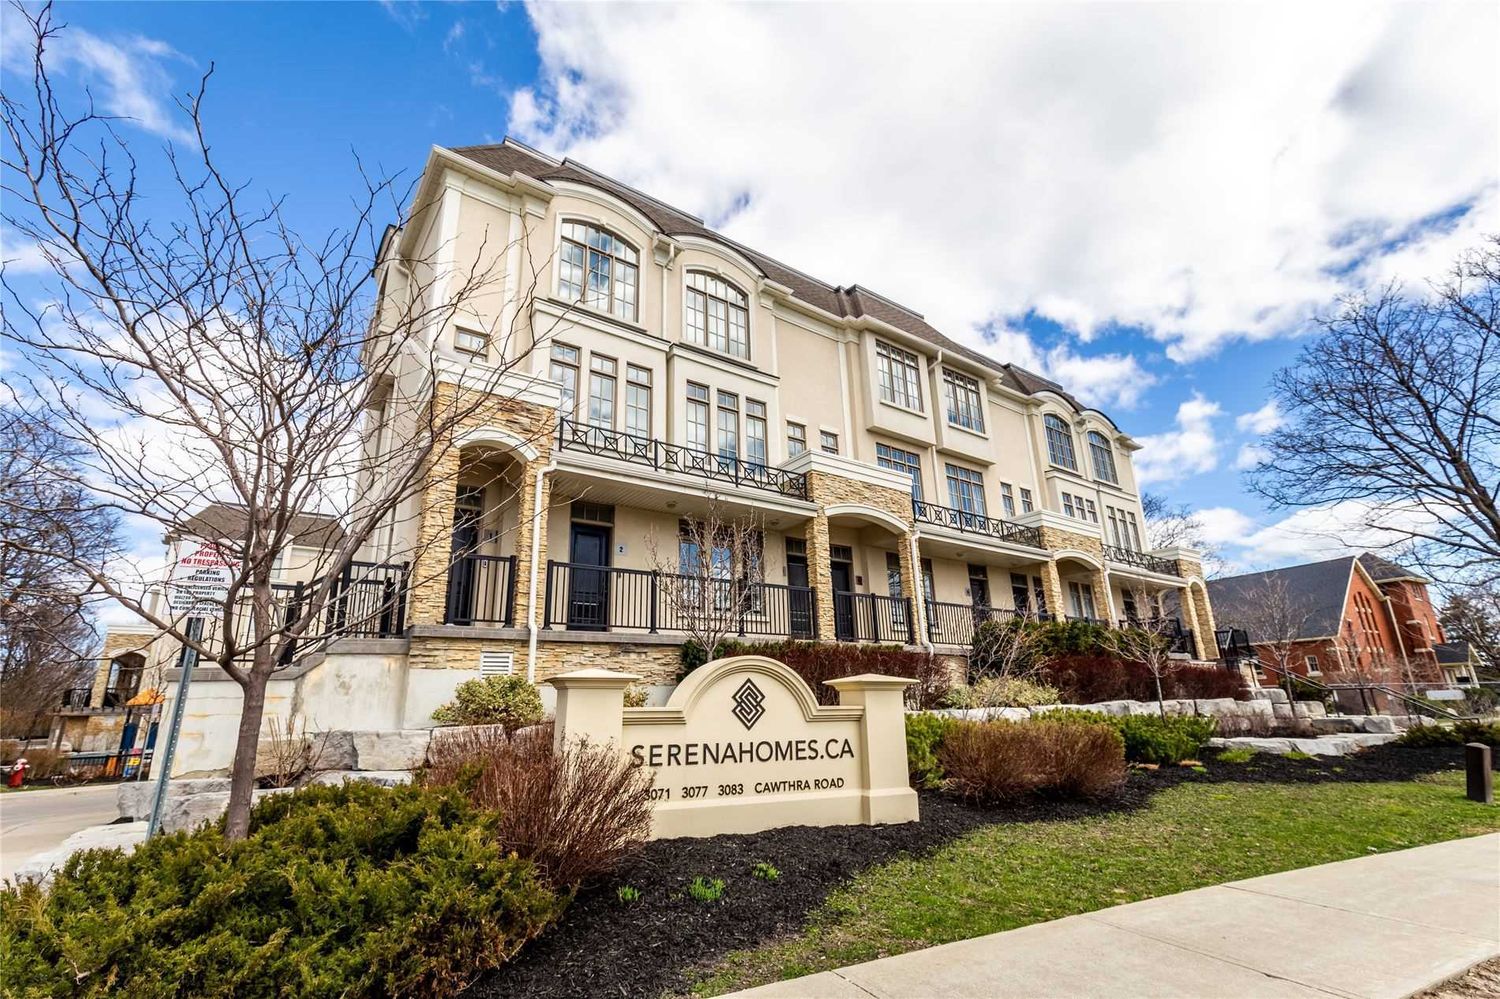 3071-3083 Cawthra Road. Serena Homes Townhomes is located in  Mississauga, Toronto - image #1 of 2